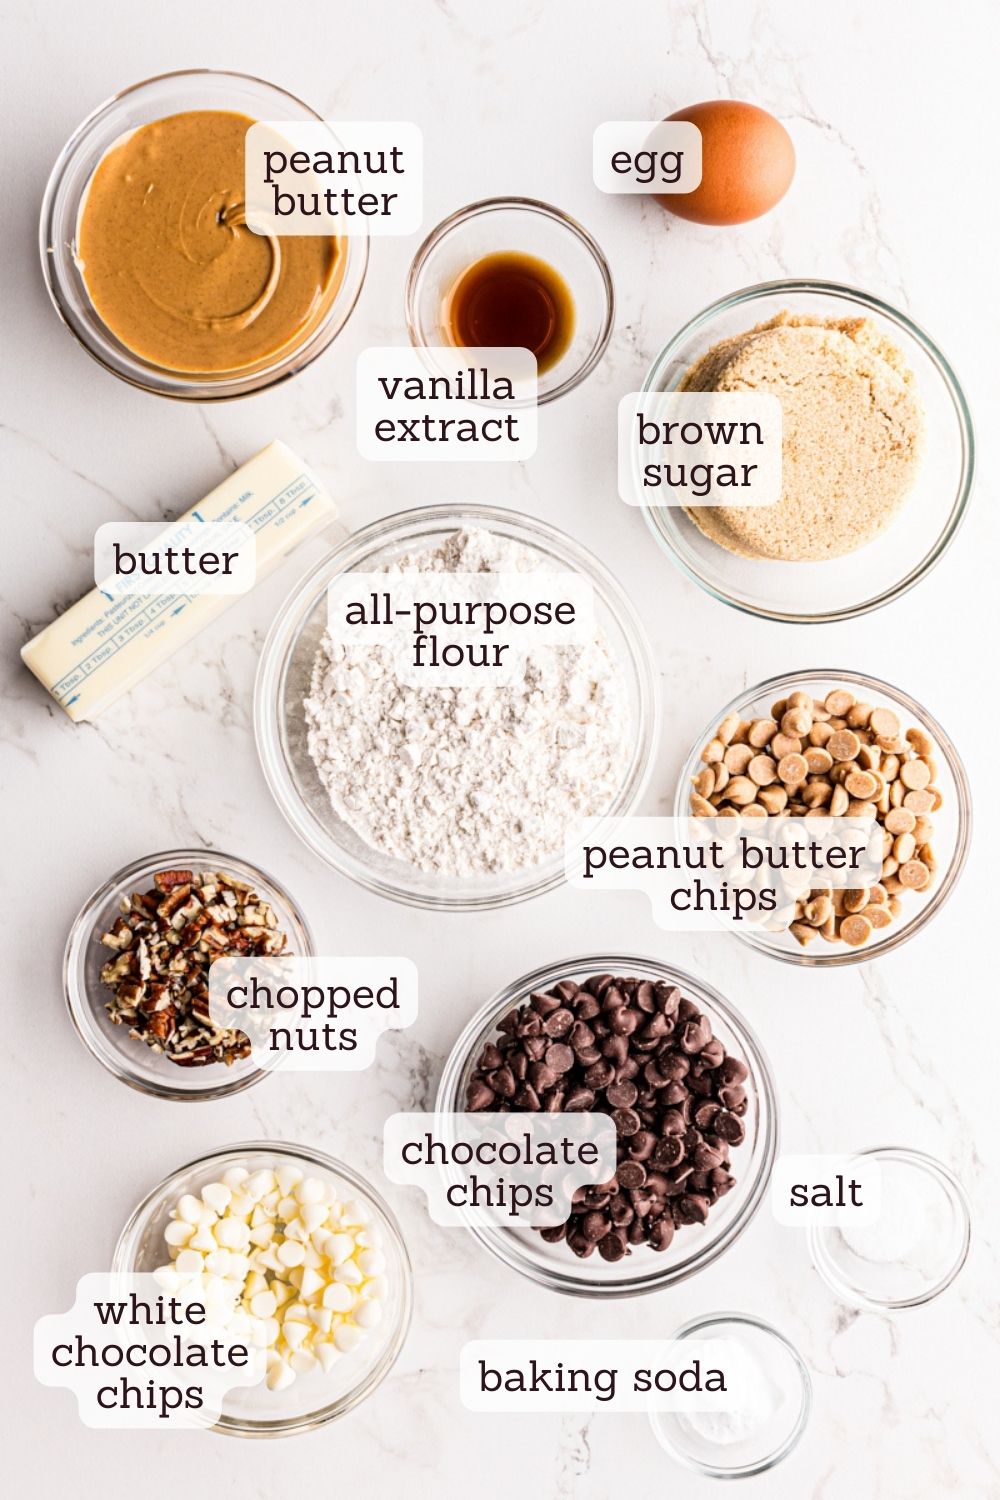 Overhead view of ingredients for peanut butter mud bars with labels